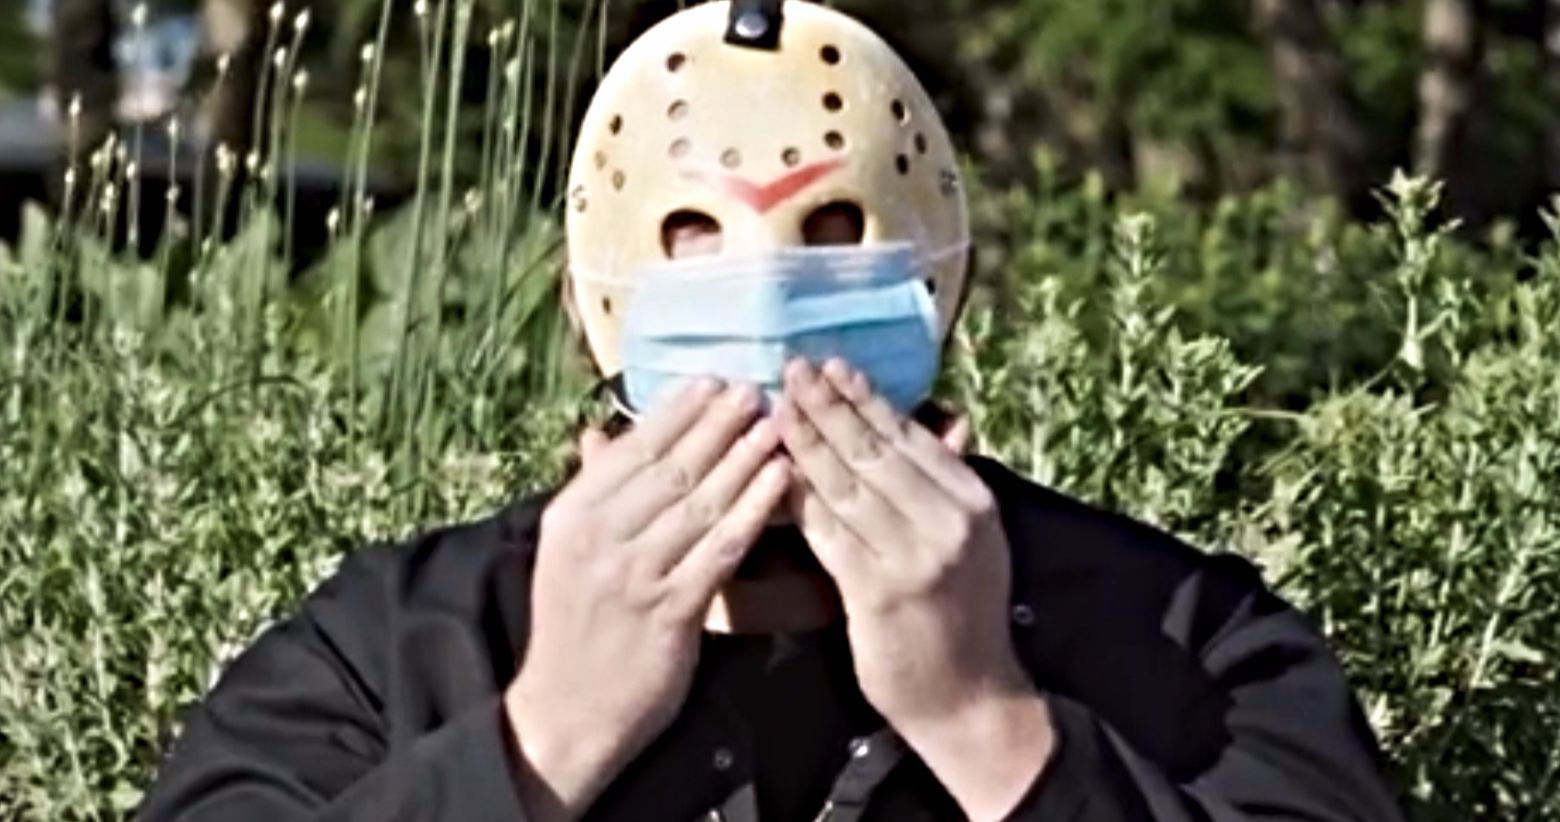 Jason Voorhees Gets a New Mask in Friday the 13th Safety PSA Video